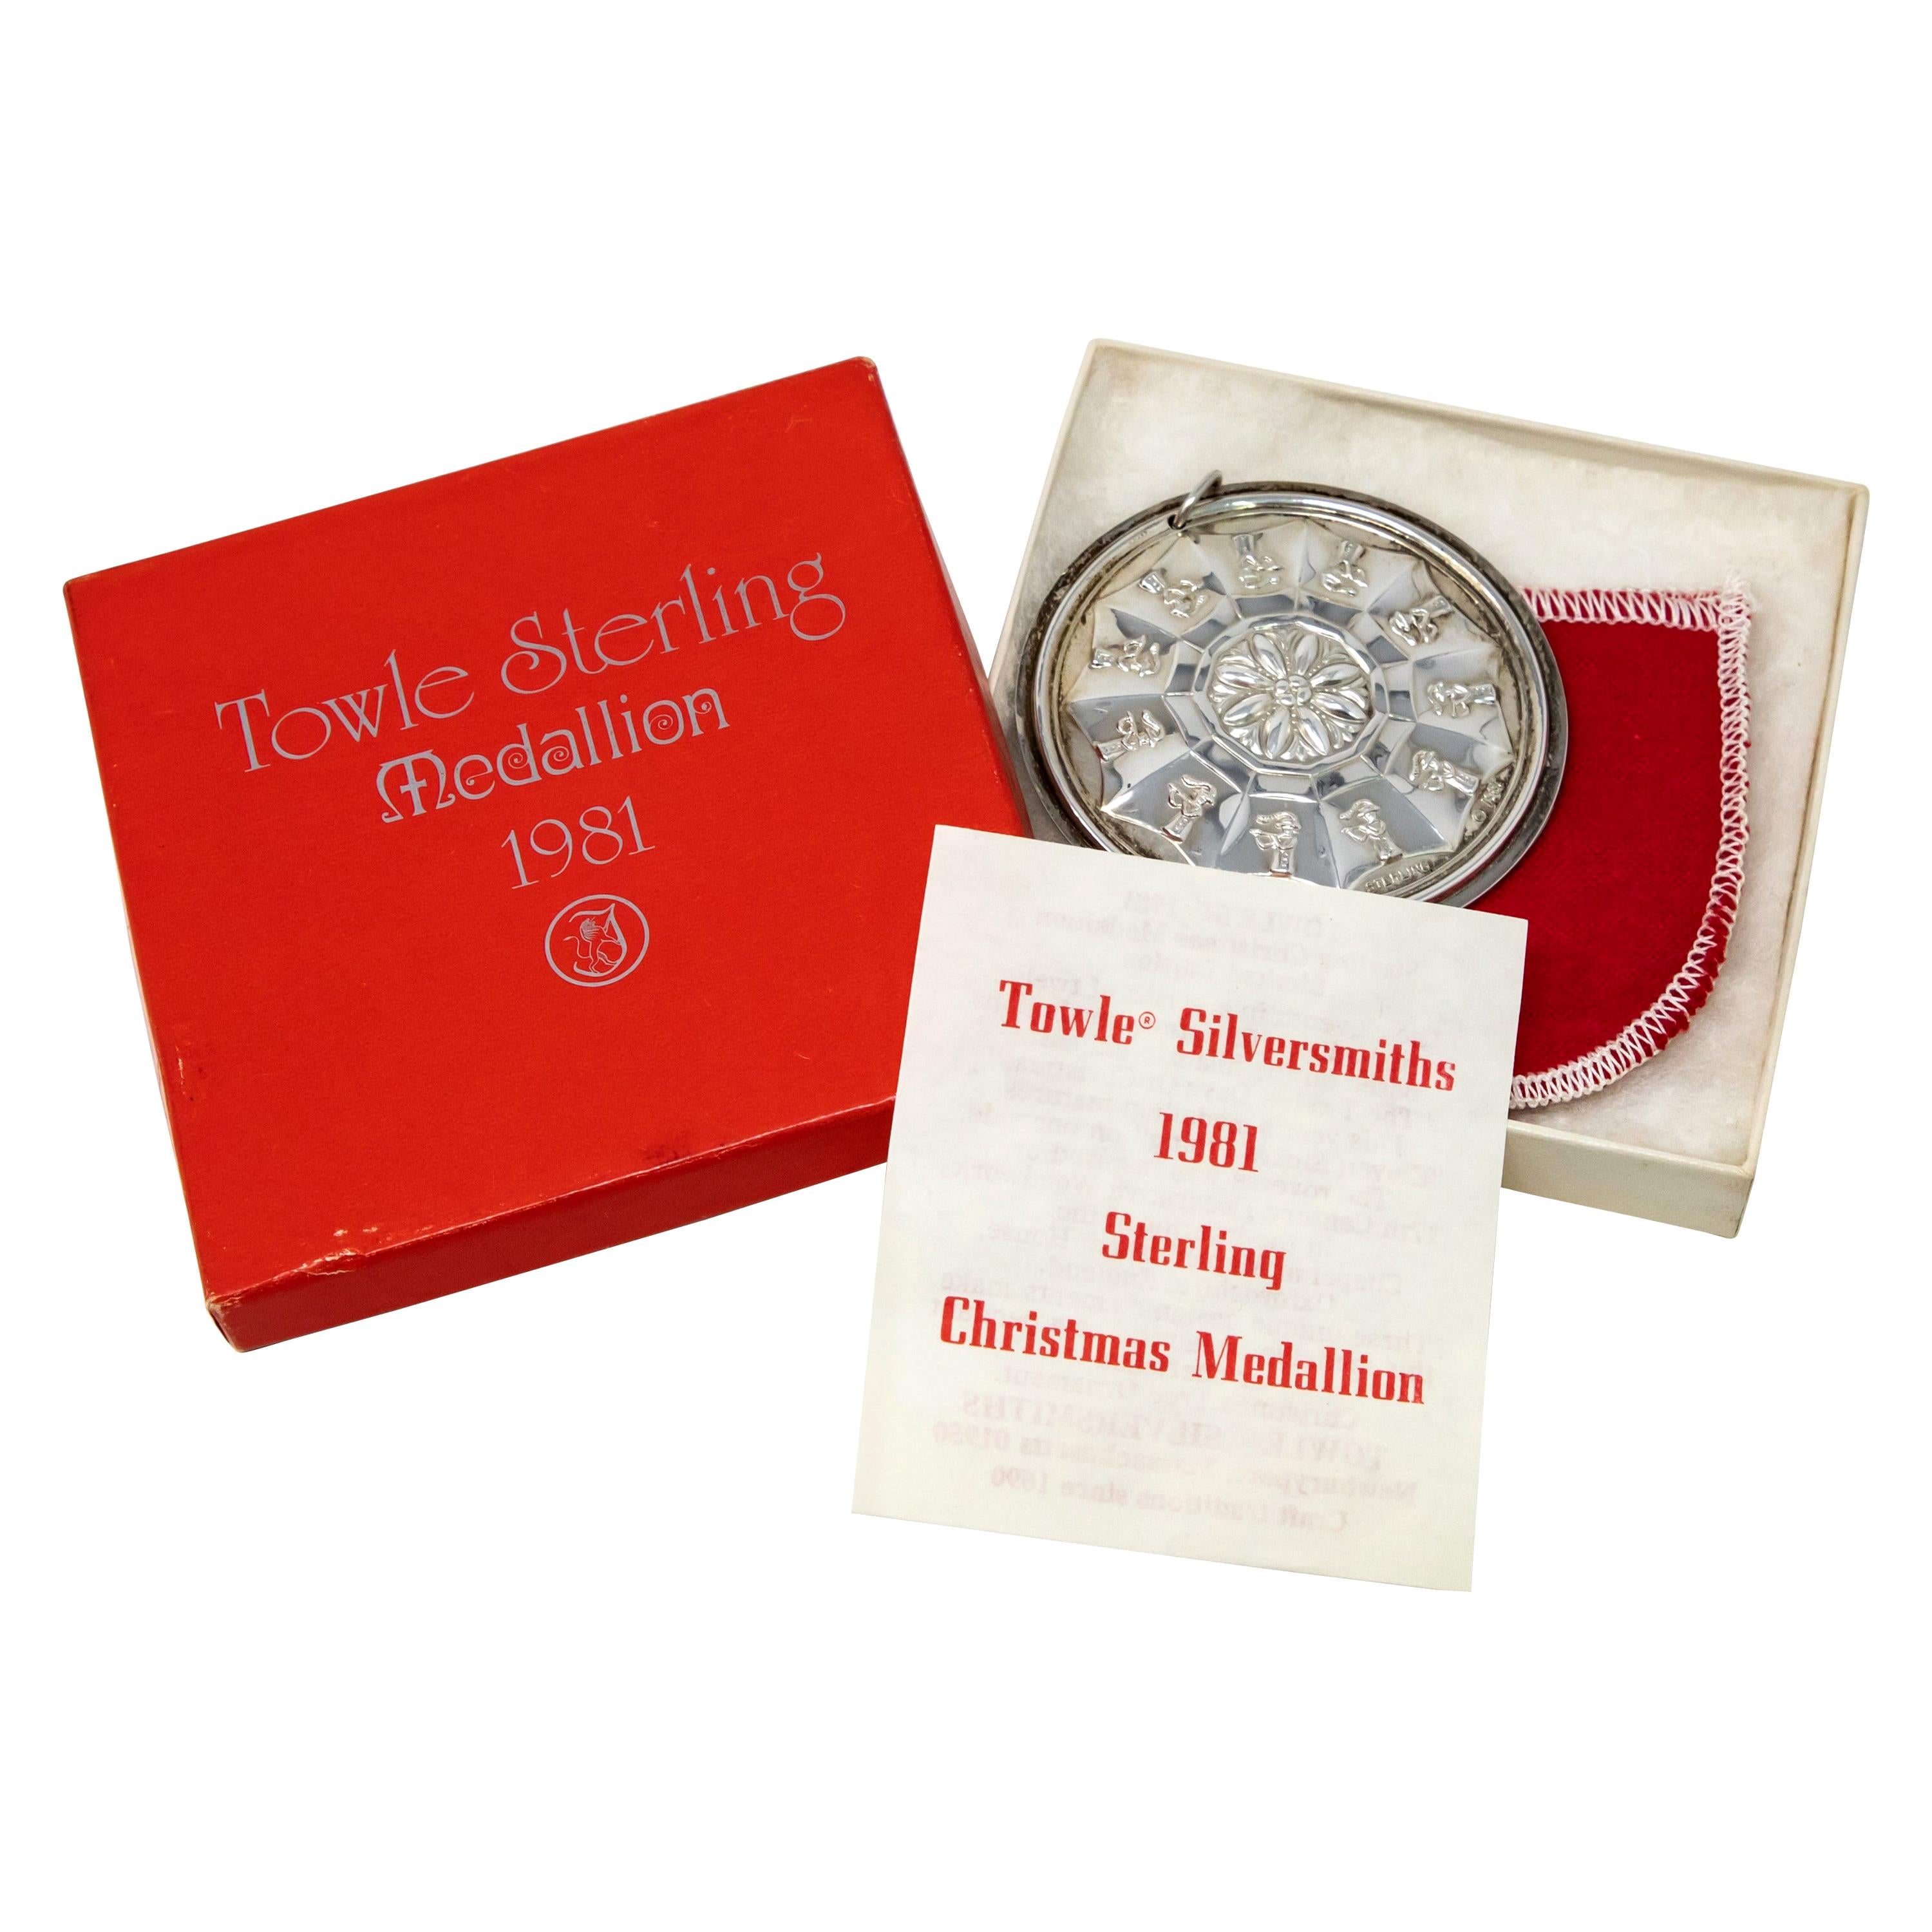 Towle Sterling Ornament "11 Pipers Piping" with Box, 1981 For Sale